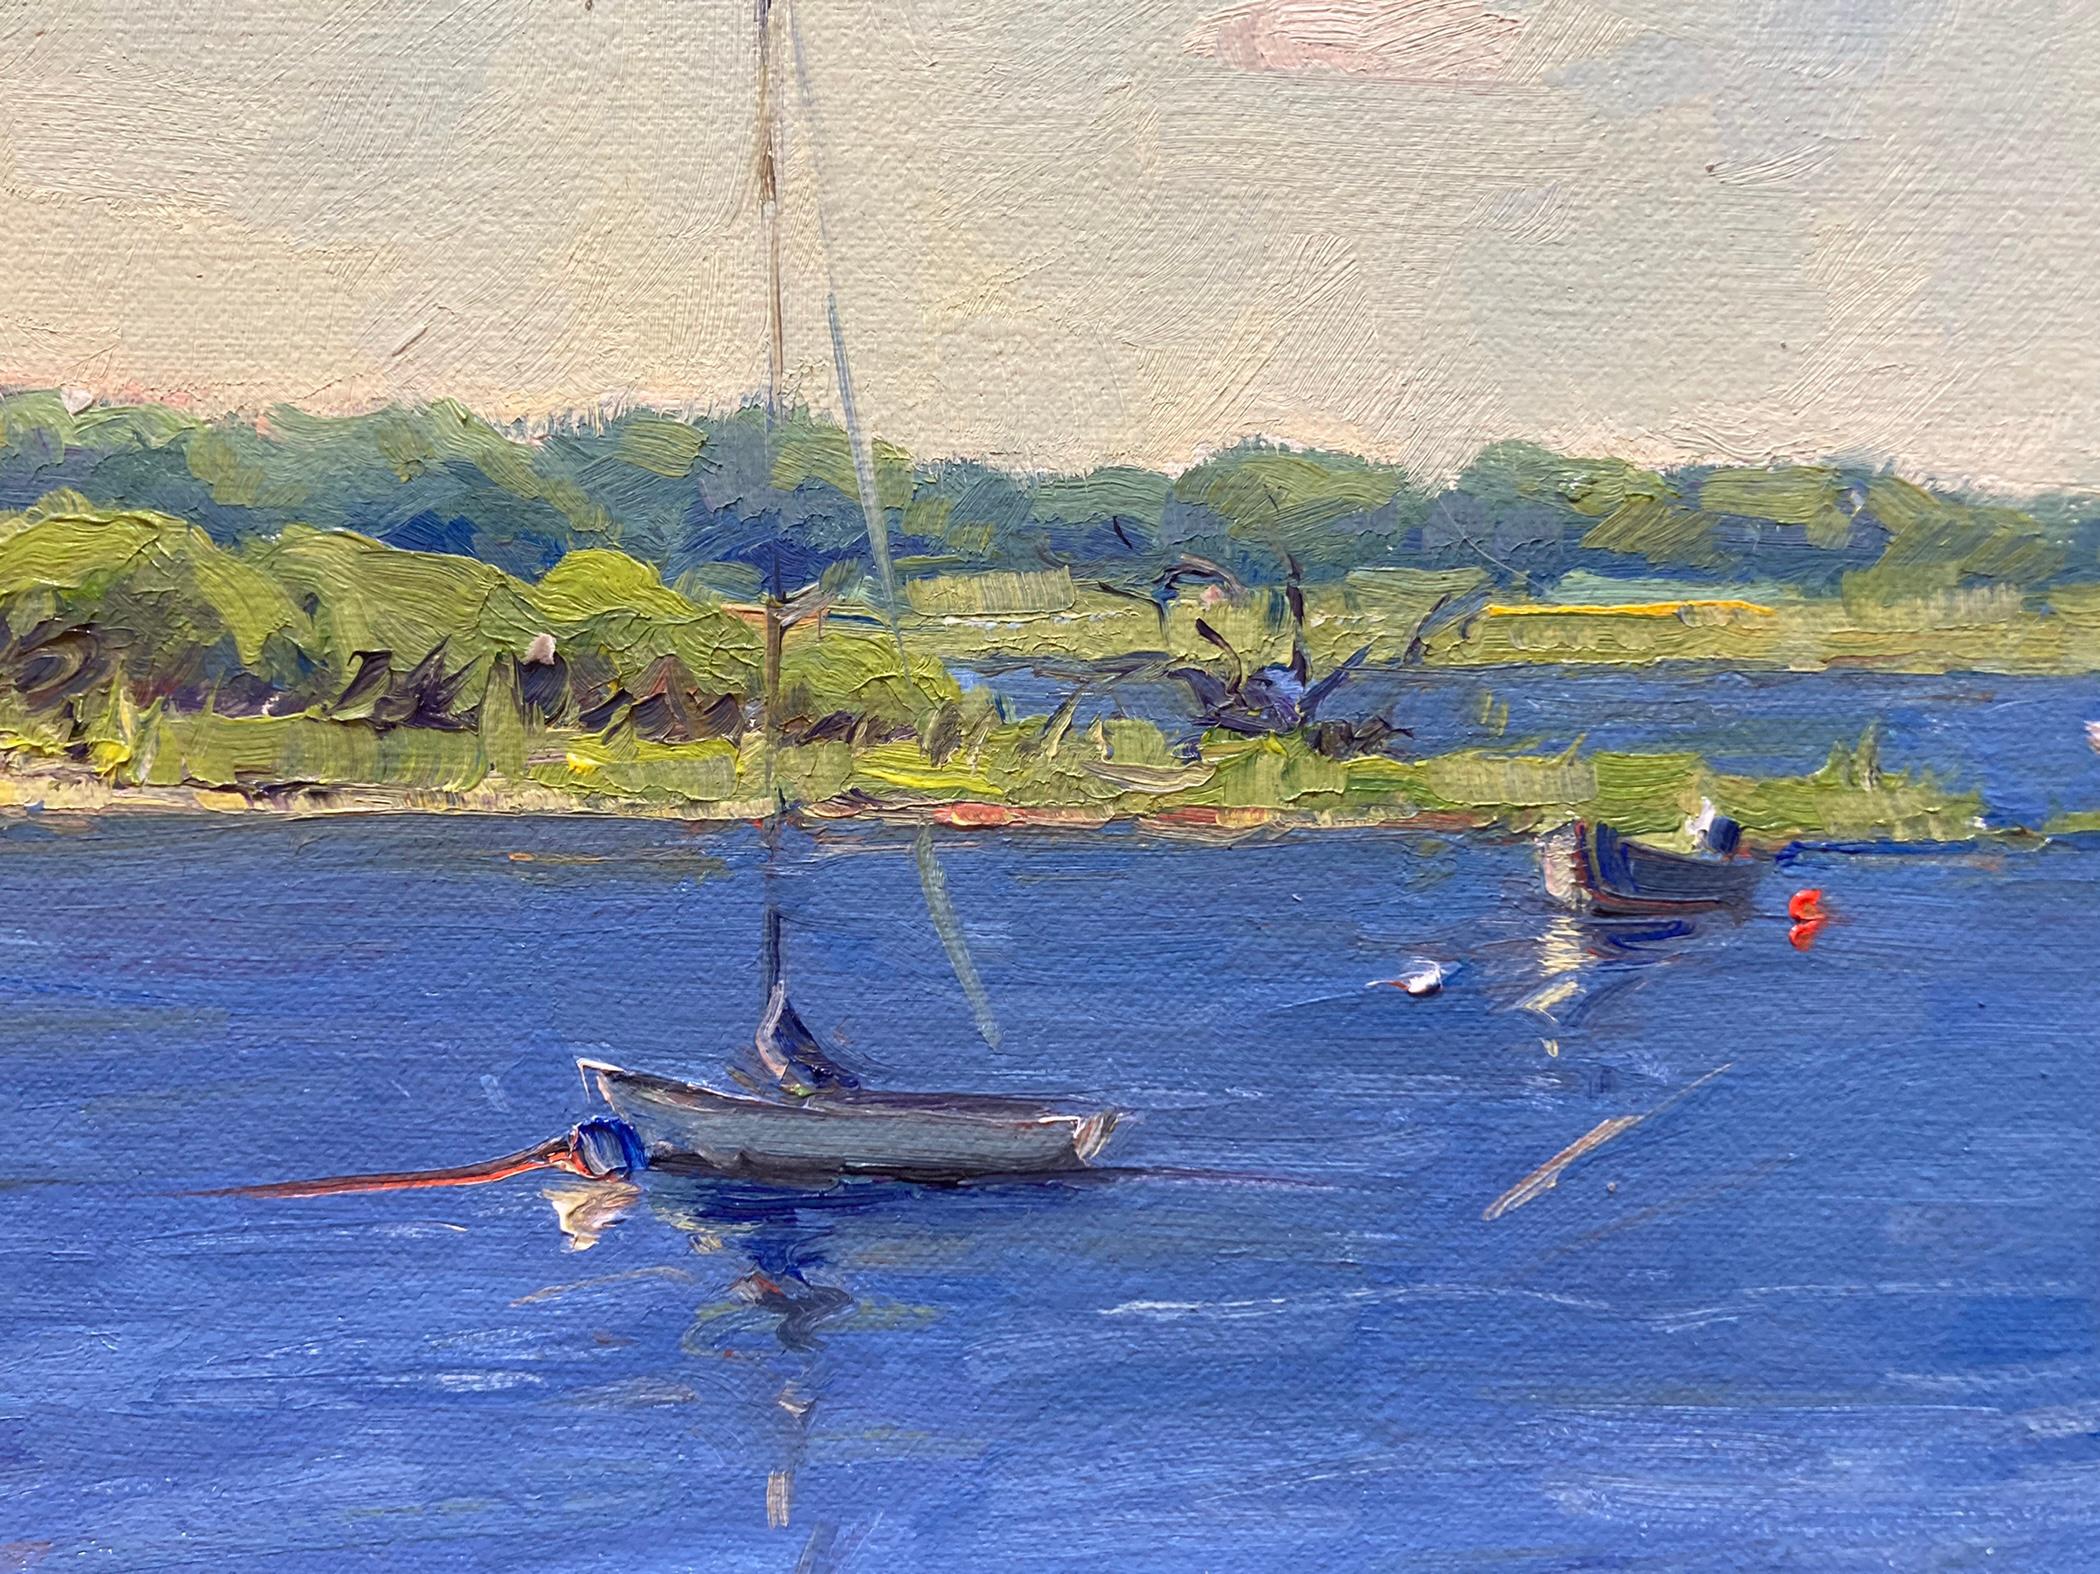 This bright painting, done en plein air, radiates the feeling of summer. Small sailboats float daintily atop electric blue water while the surrounding land looks completely empty of human interference. Orsolic Dalessio created an idyllic scene of